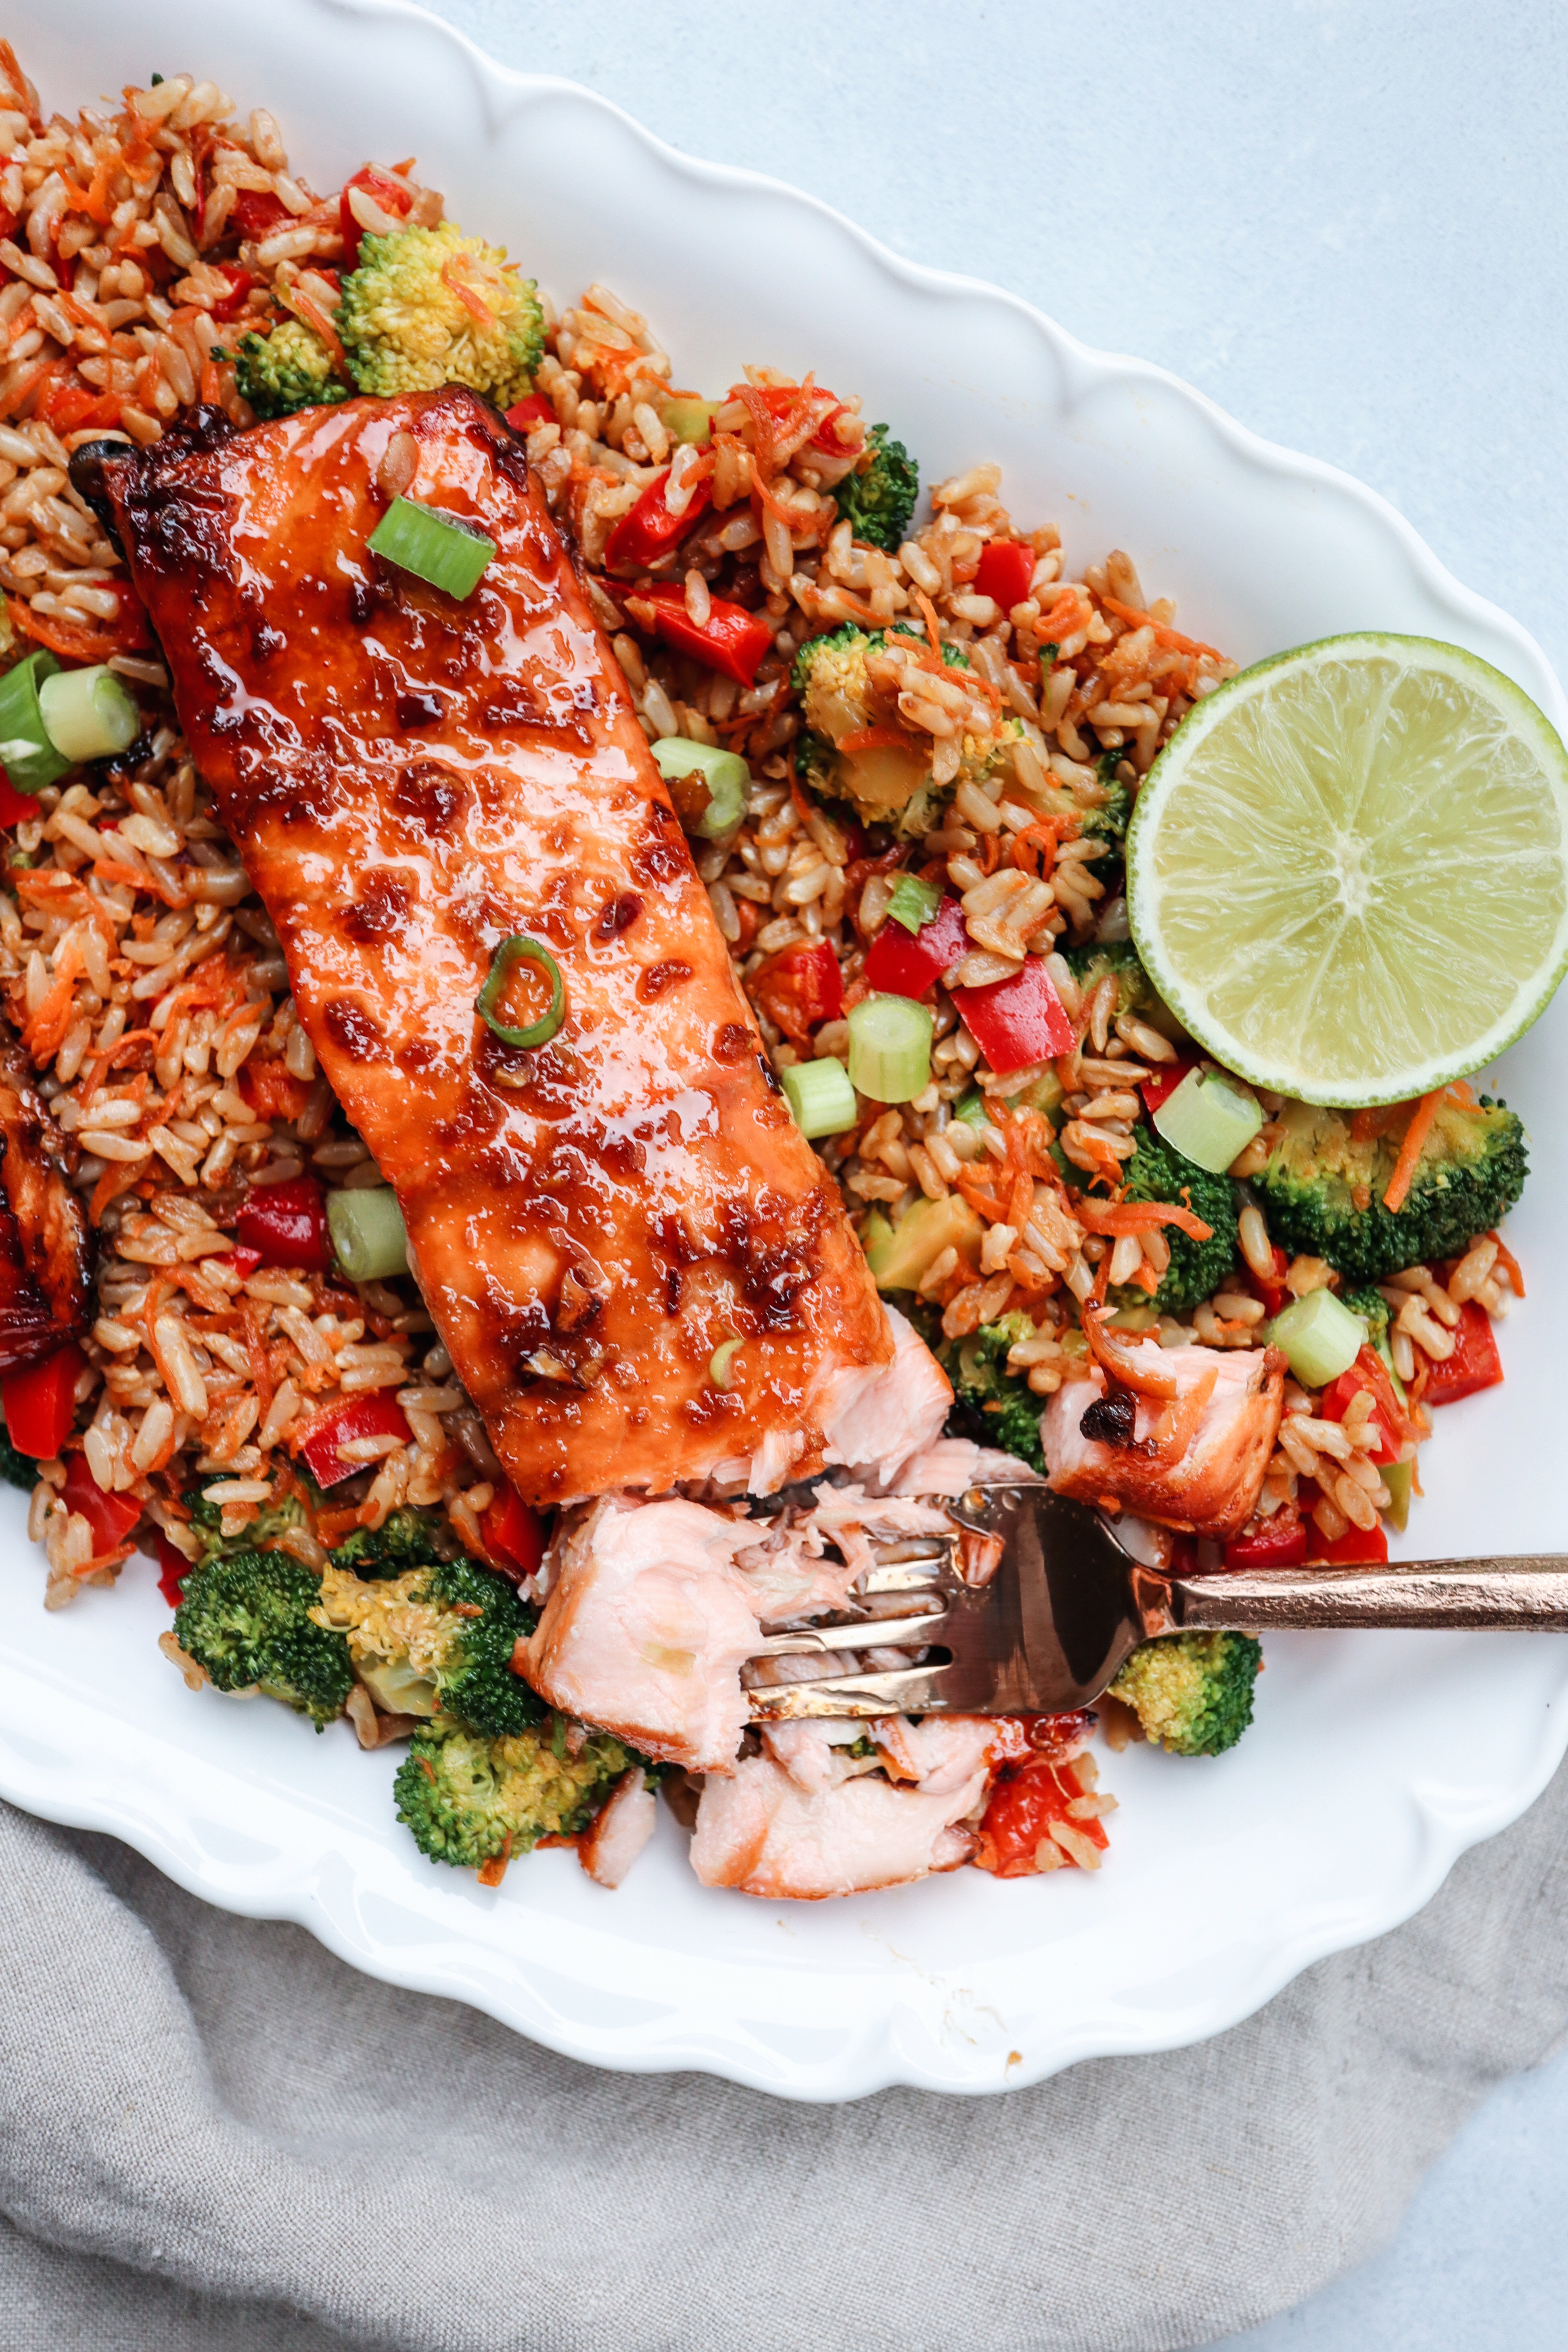 10 Minute Asian Glazed Salmon with Veggies - Anolon Cookware